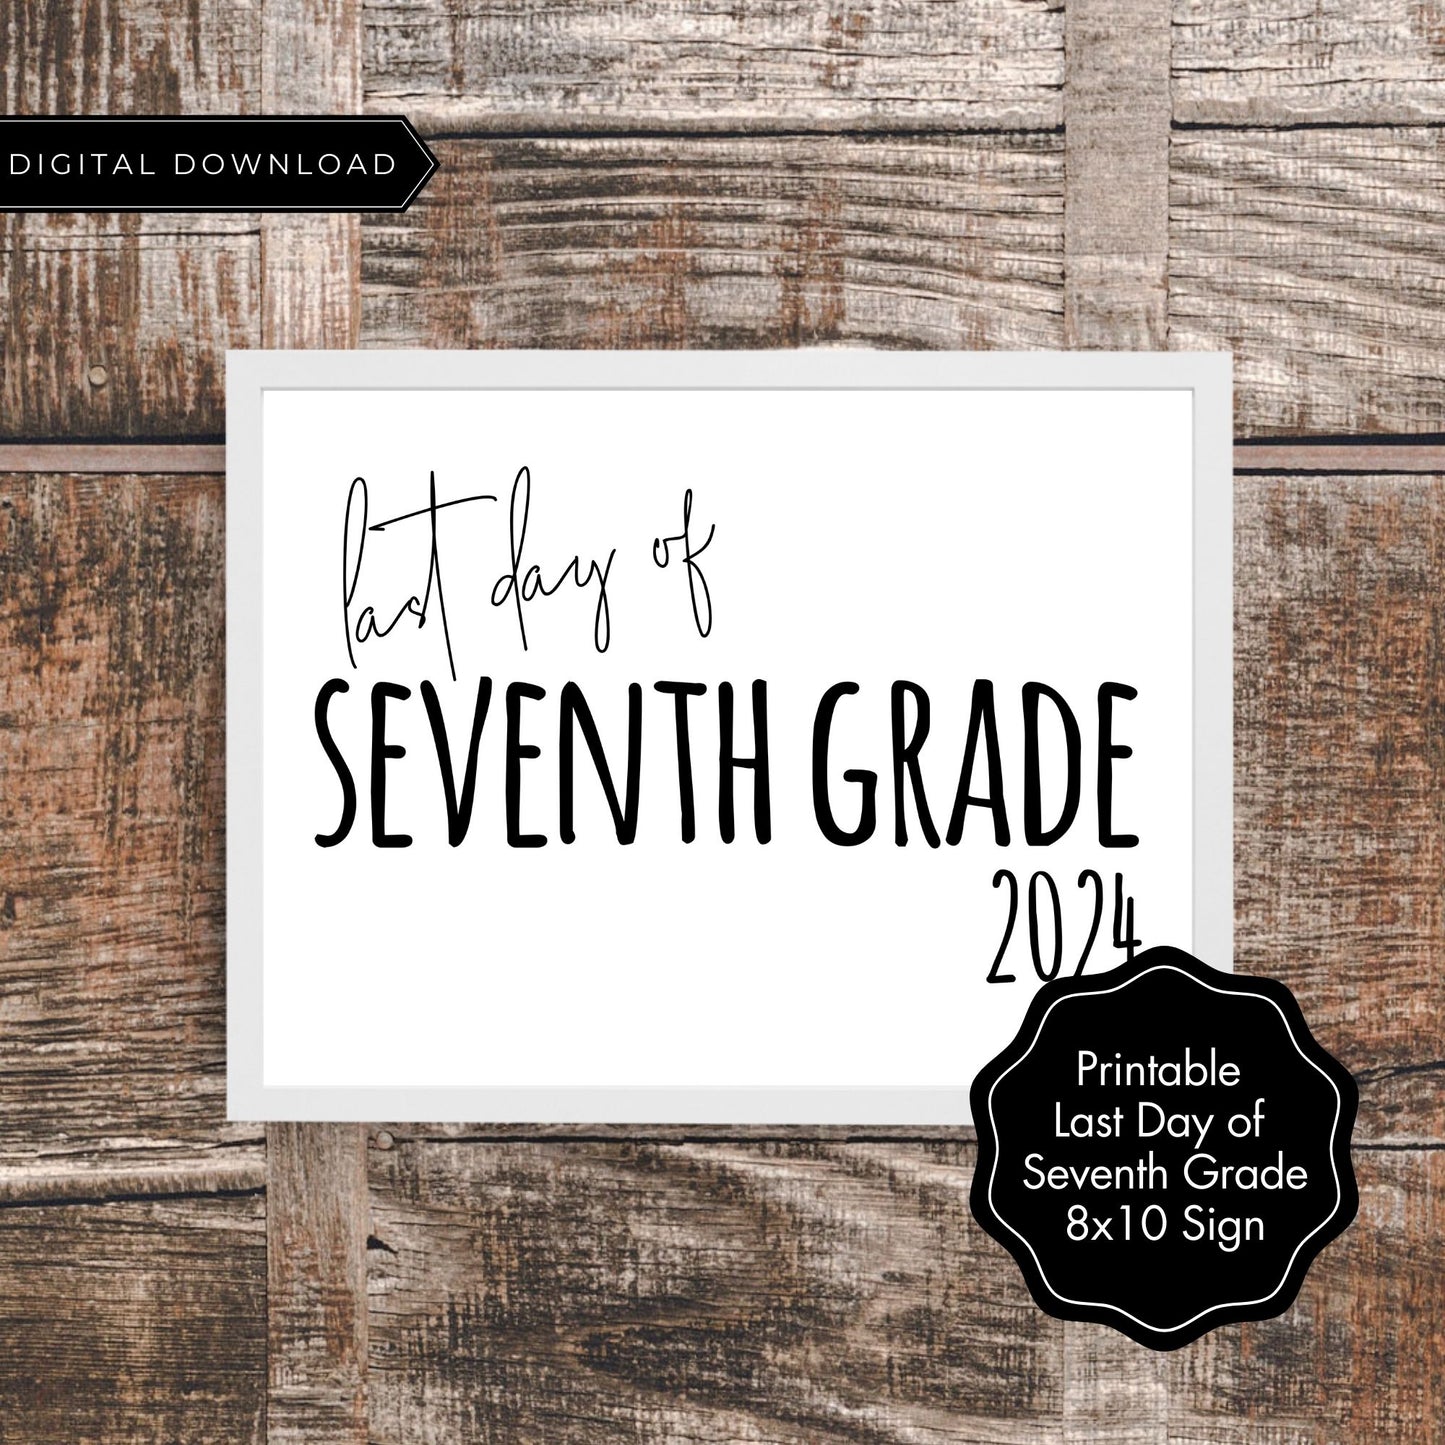 Last Day of Seventh Grade 2024 Sign - Printable